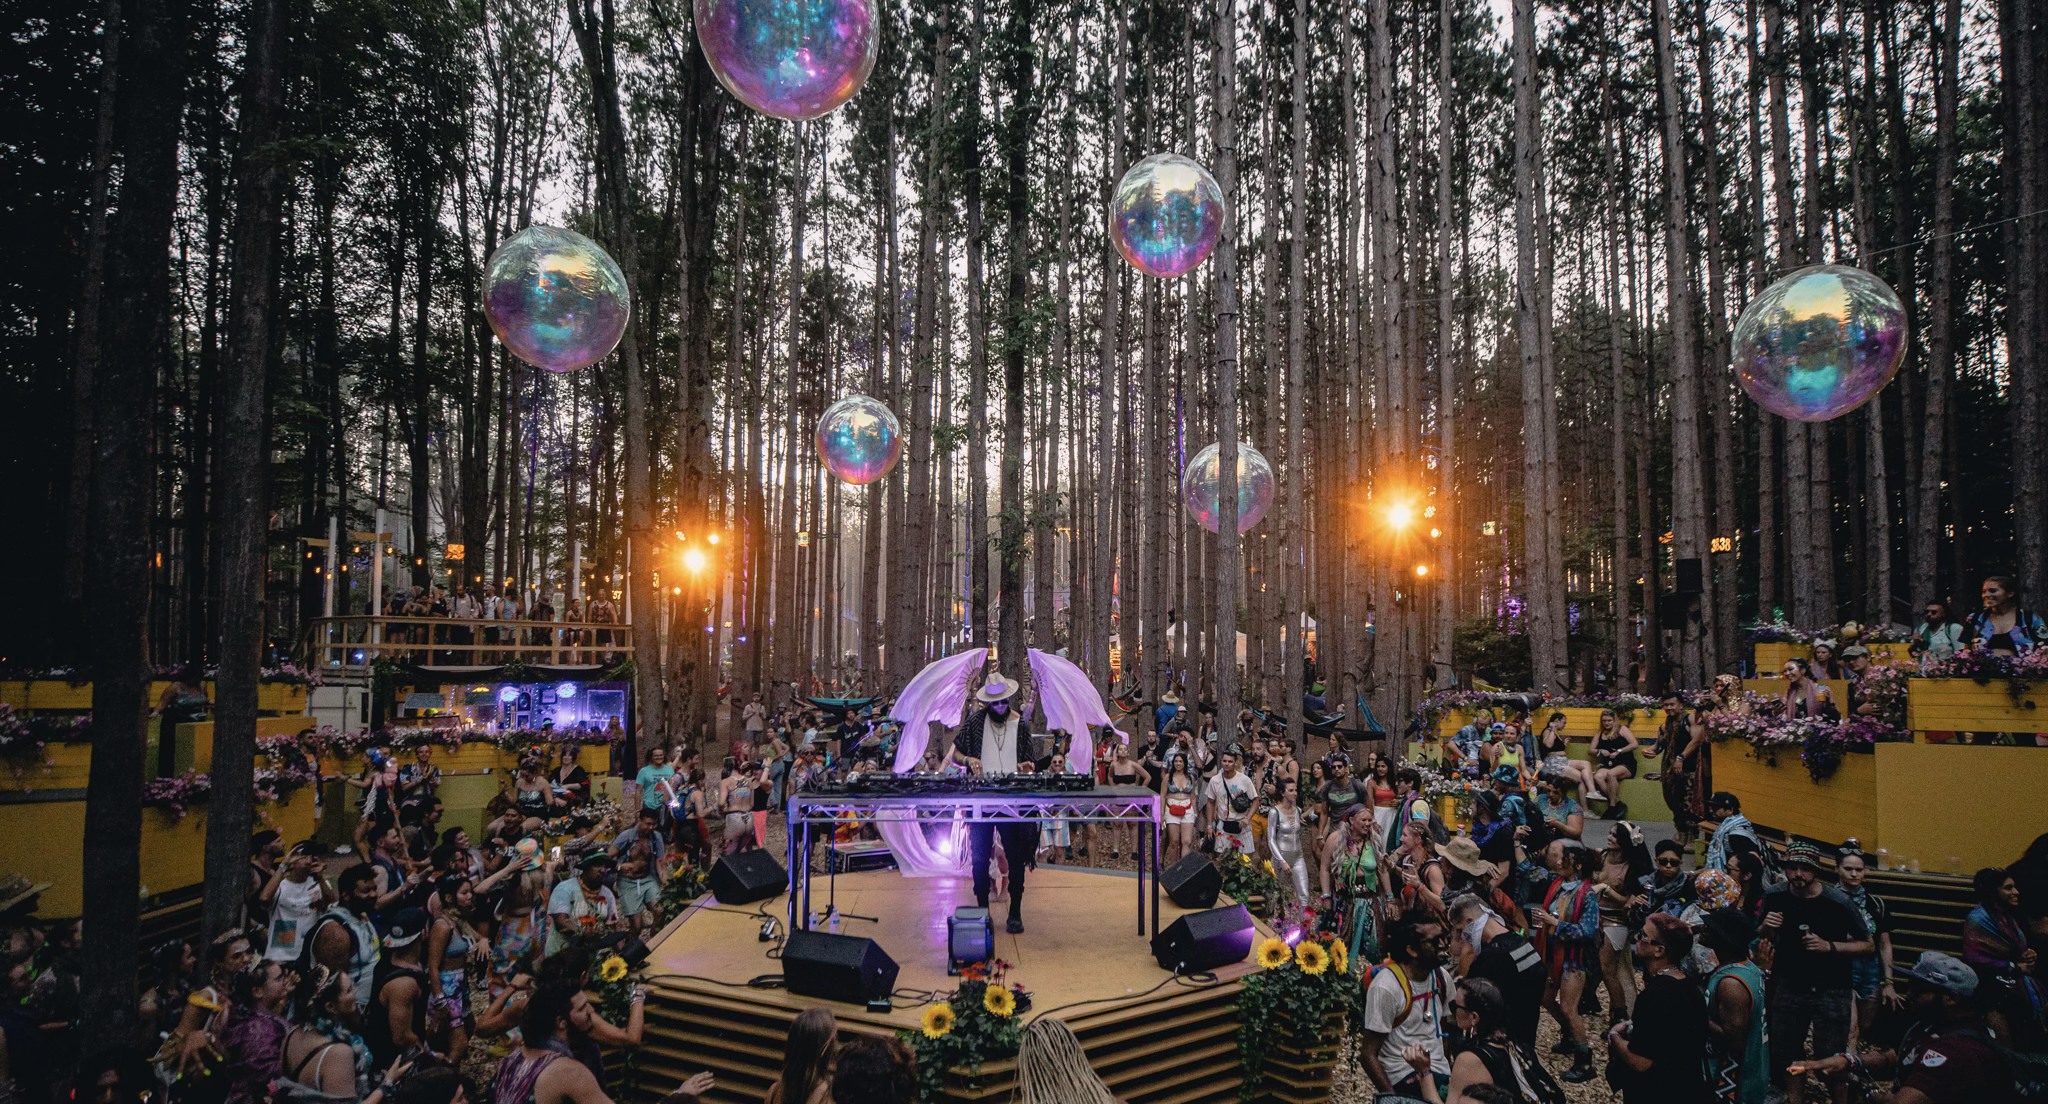 Electric Forest An Epic Music Festival In Rothbury, Michigan